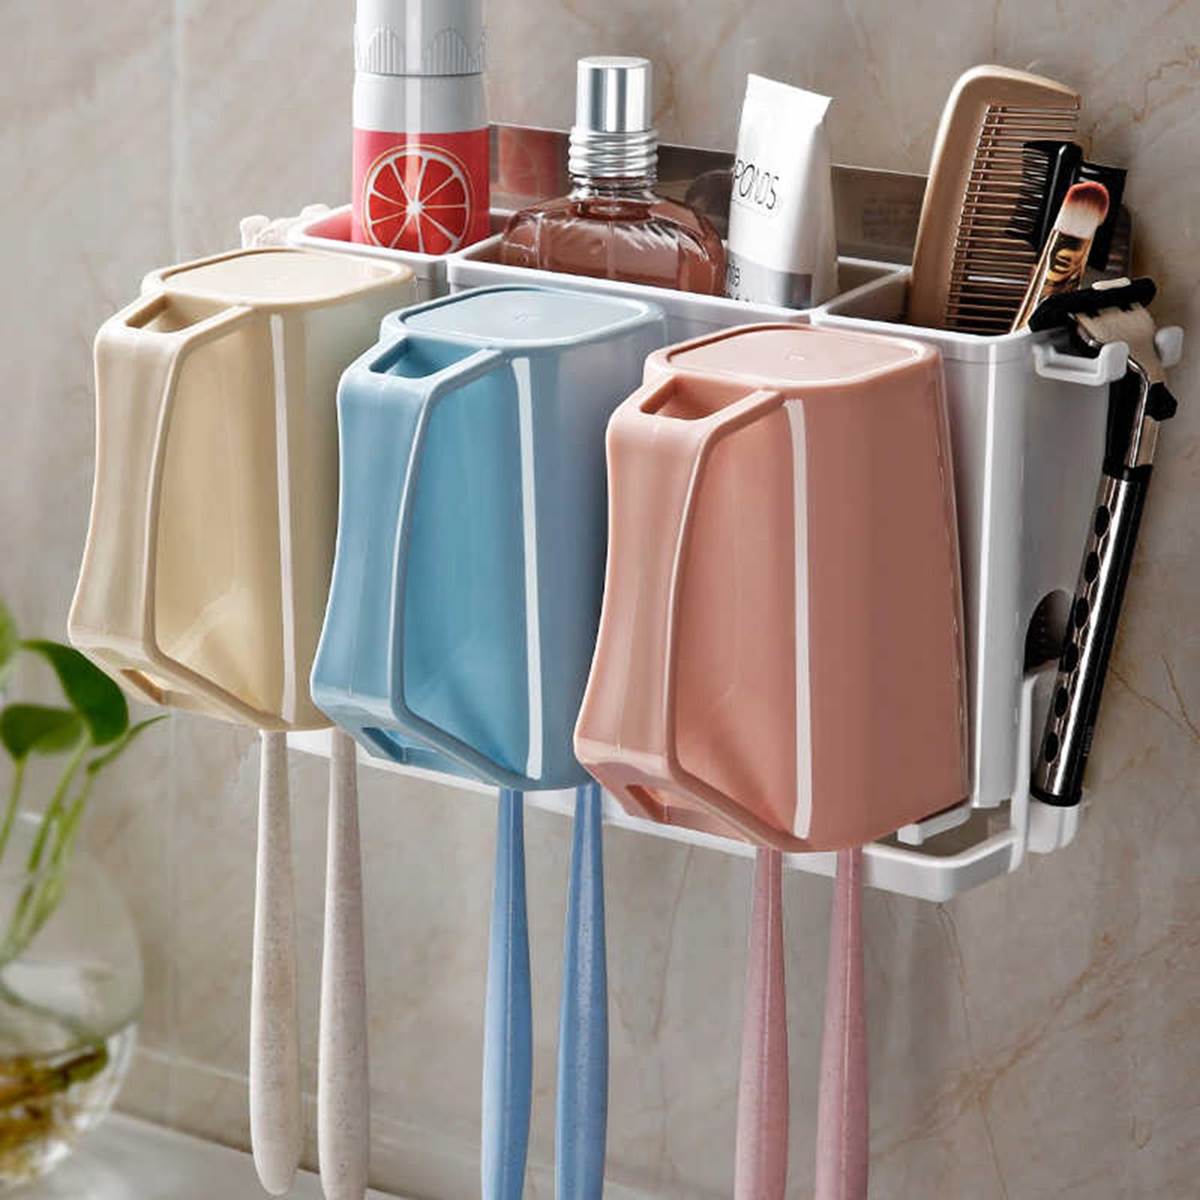 Multifunctional Wall Mounted Self Adhesive Toothbrush Holder for Bathroom with 3 Cups